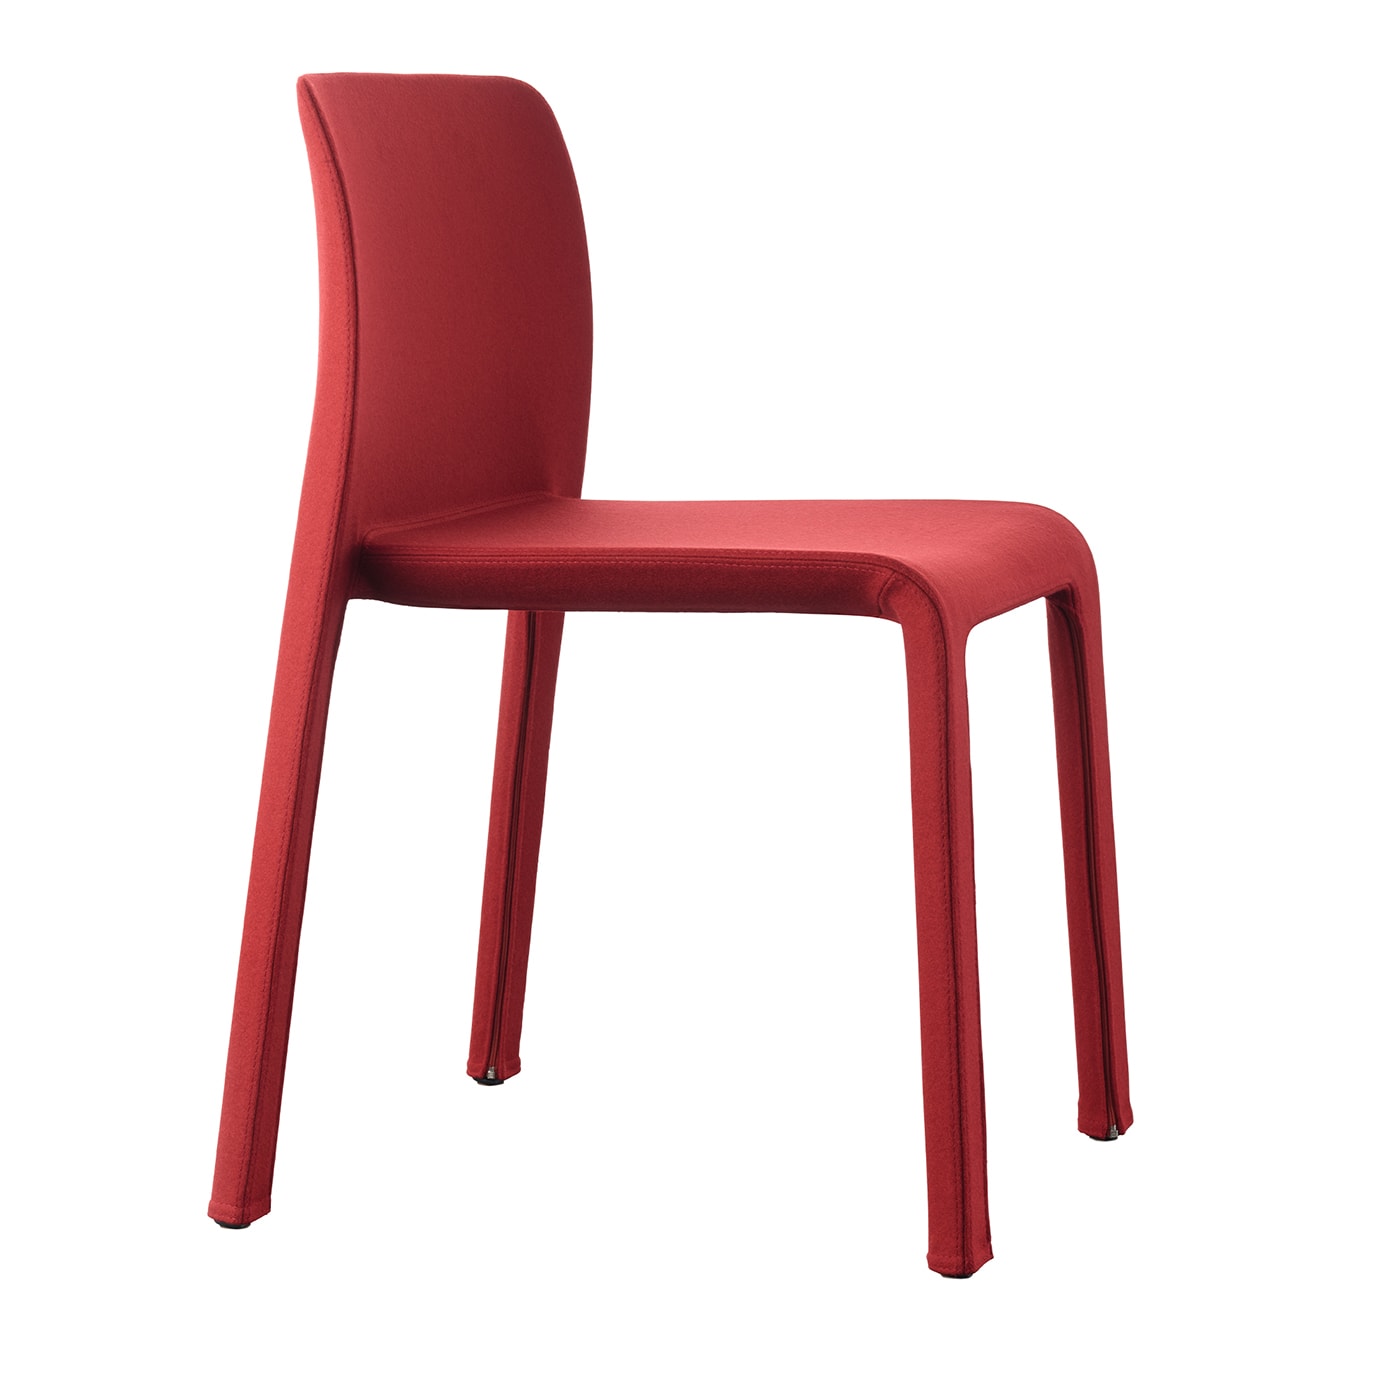 First Dressed Red Chair by Stefano Giovannoni - Magis